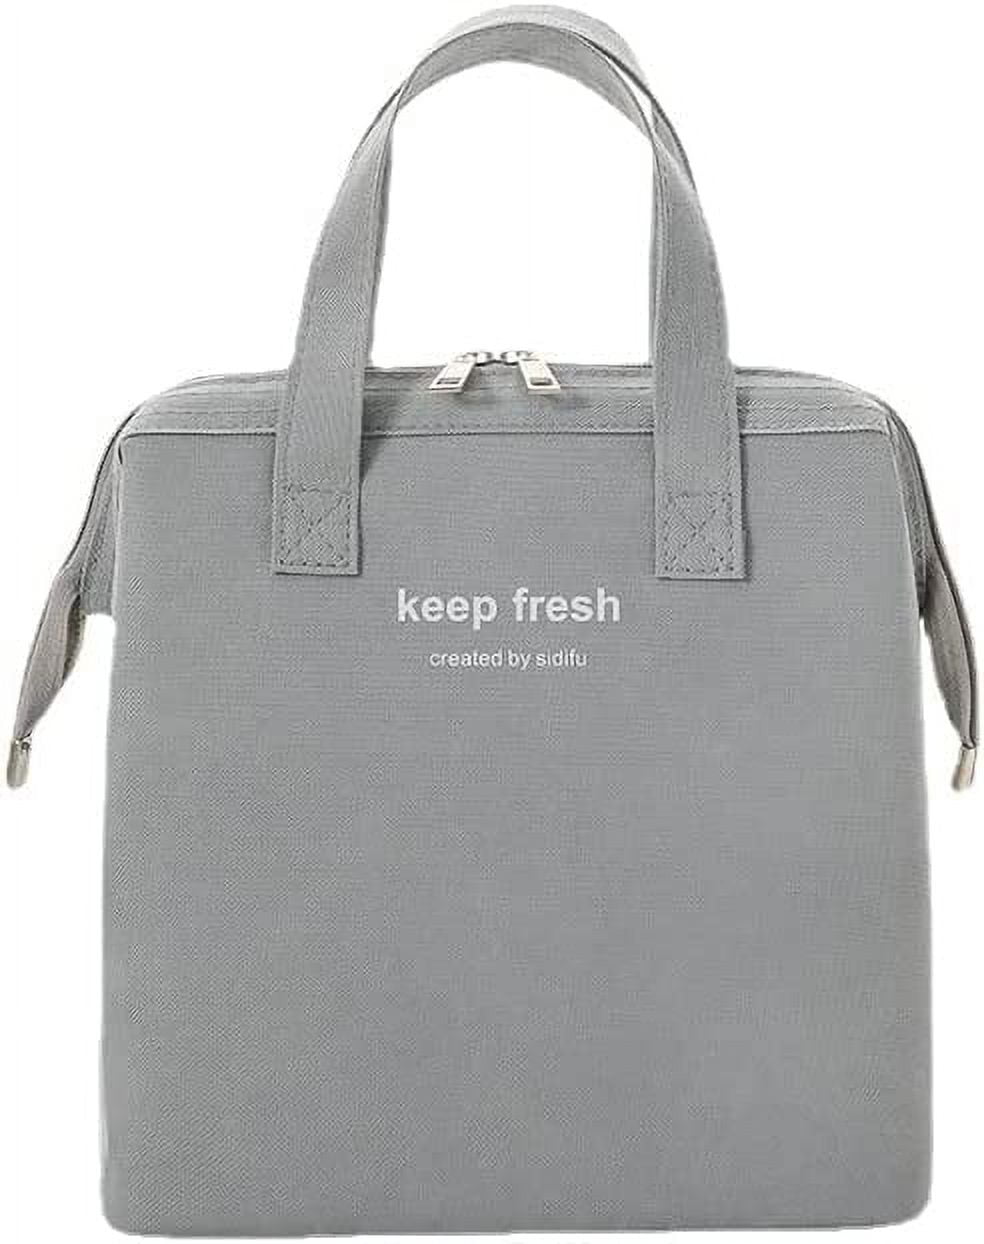 Sunday Shopping: A pretty, practical & professional lunch bag that